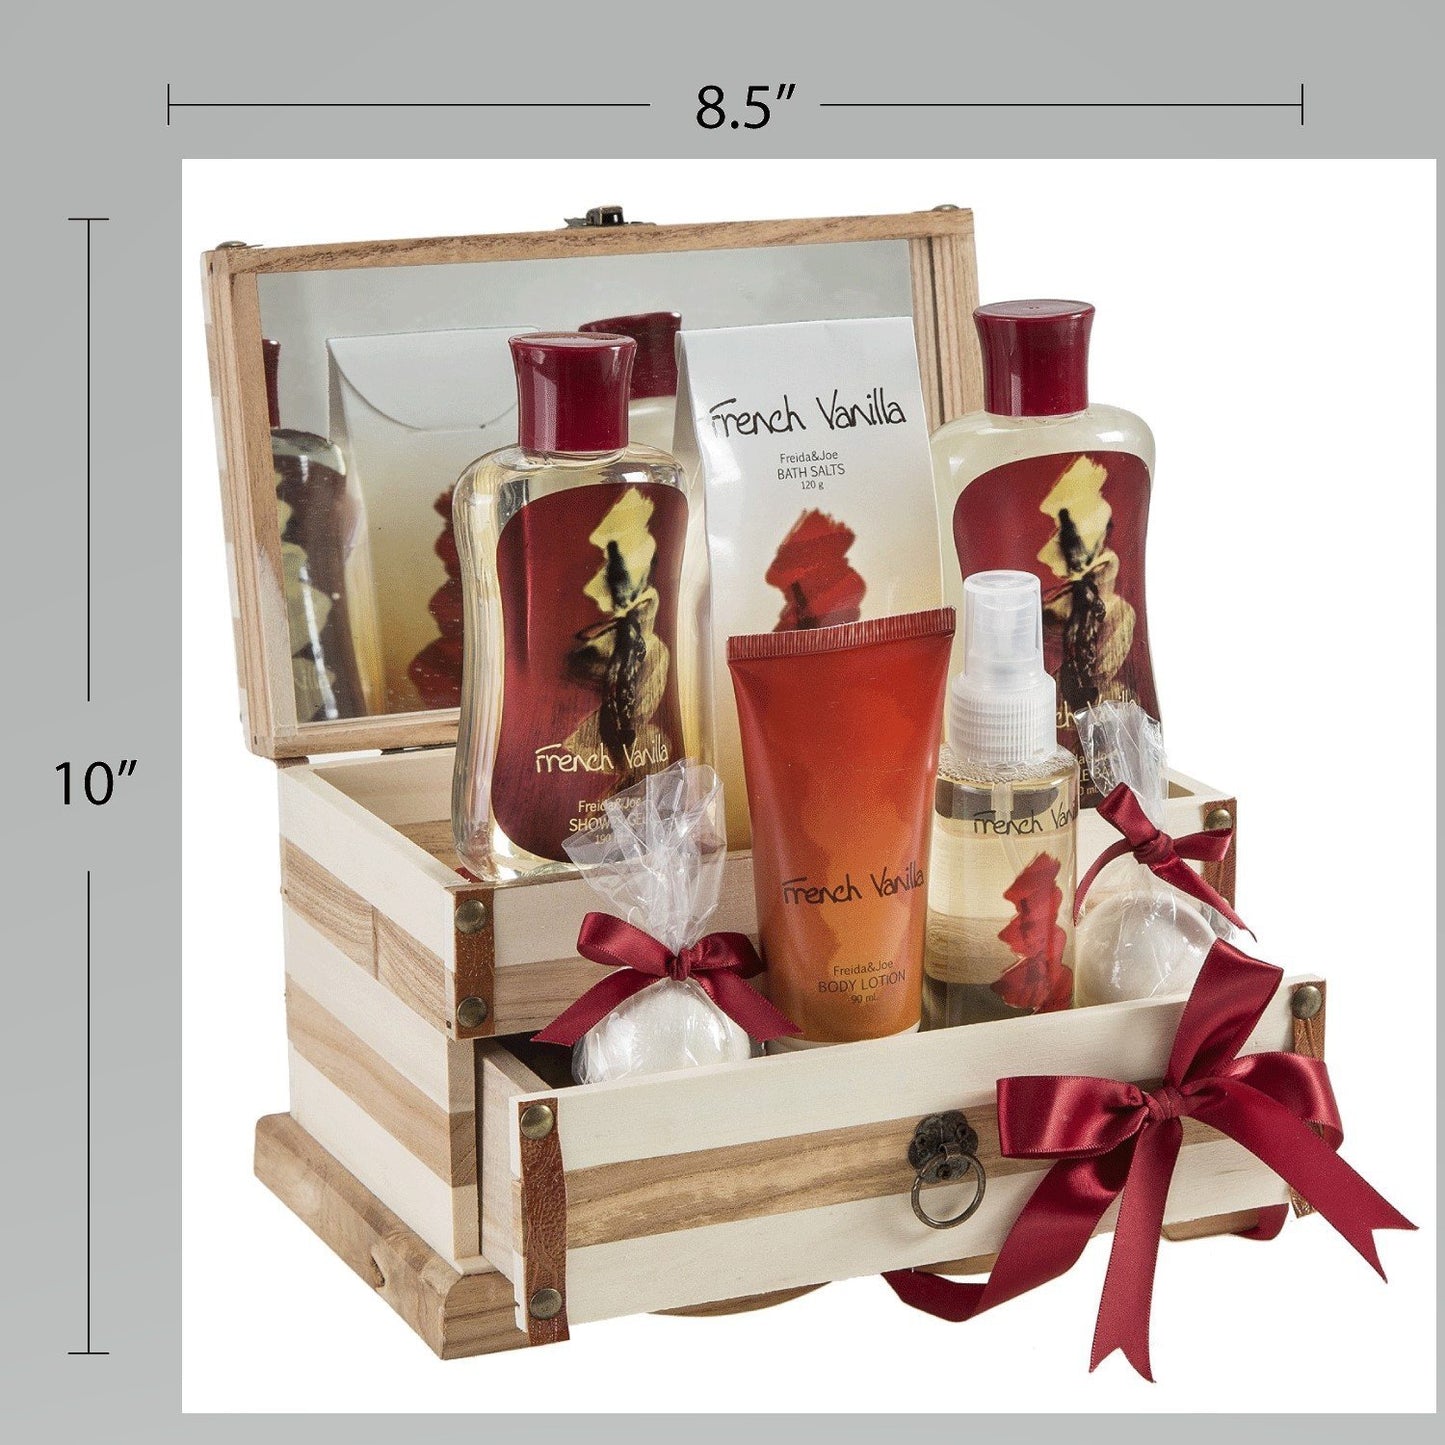 French Vanilla Set: Bath Bombs, Body Lotion, Body Spray, & More in a Wooden Jewelry Box